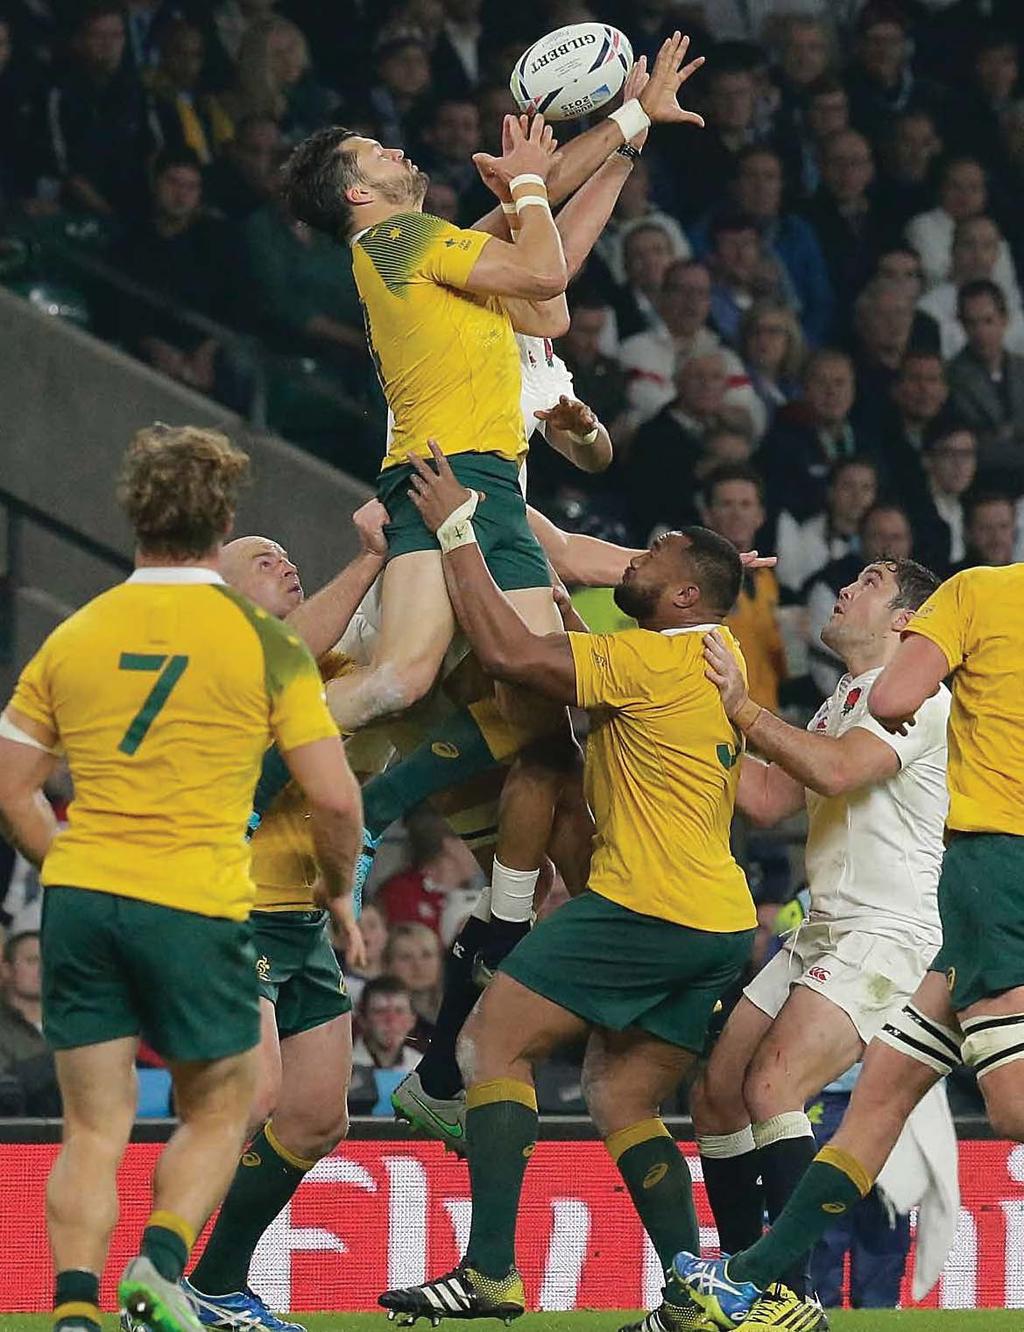 Rugby World Cup 2019 Fully Escorted Tour A once in a life time opportunity to cheer on the aussies and follow their journey through Rugby World Cup 2019, while also discovering the beauty, tradition